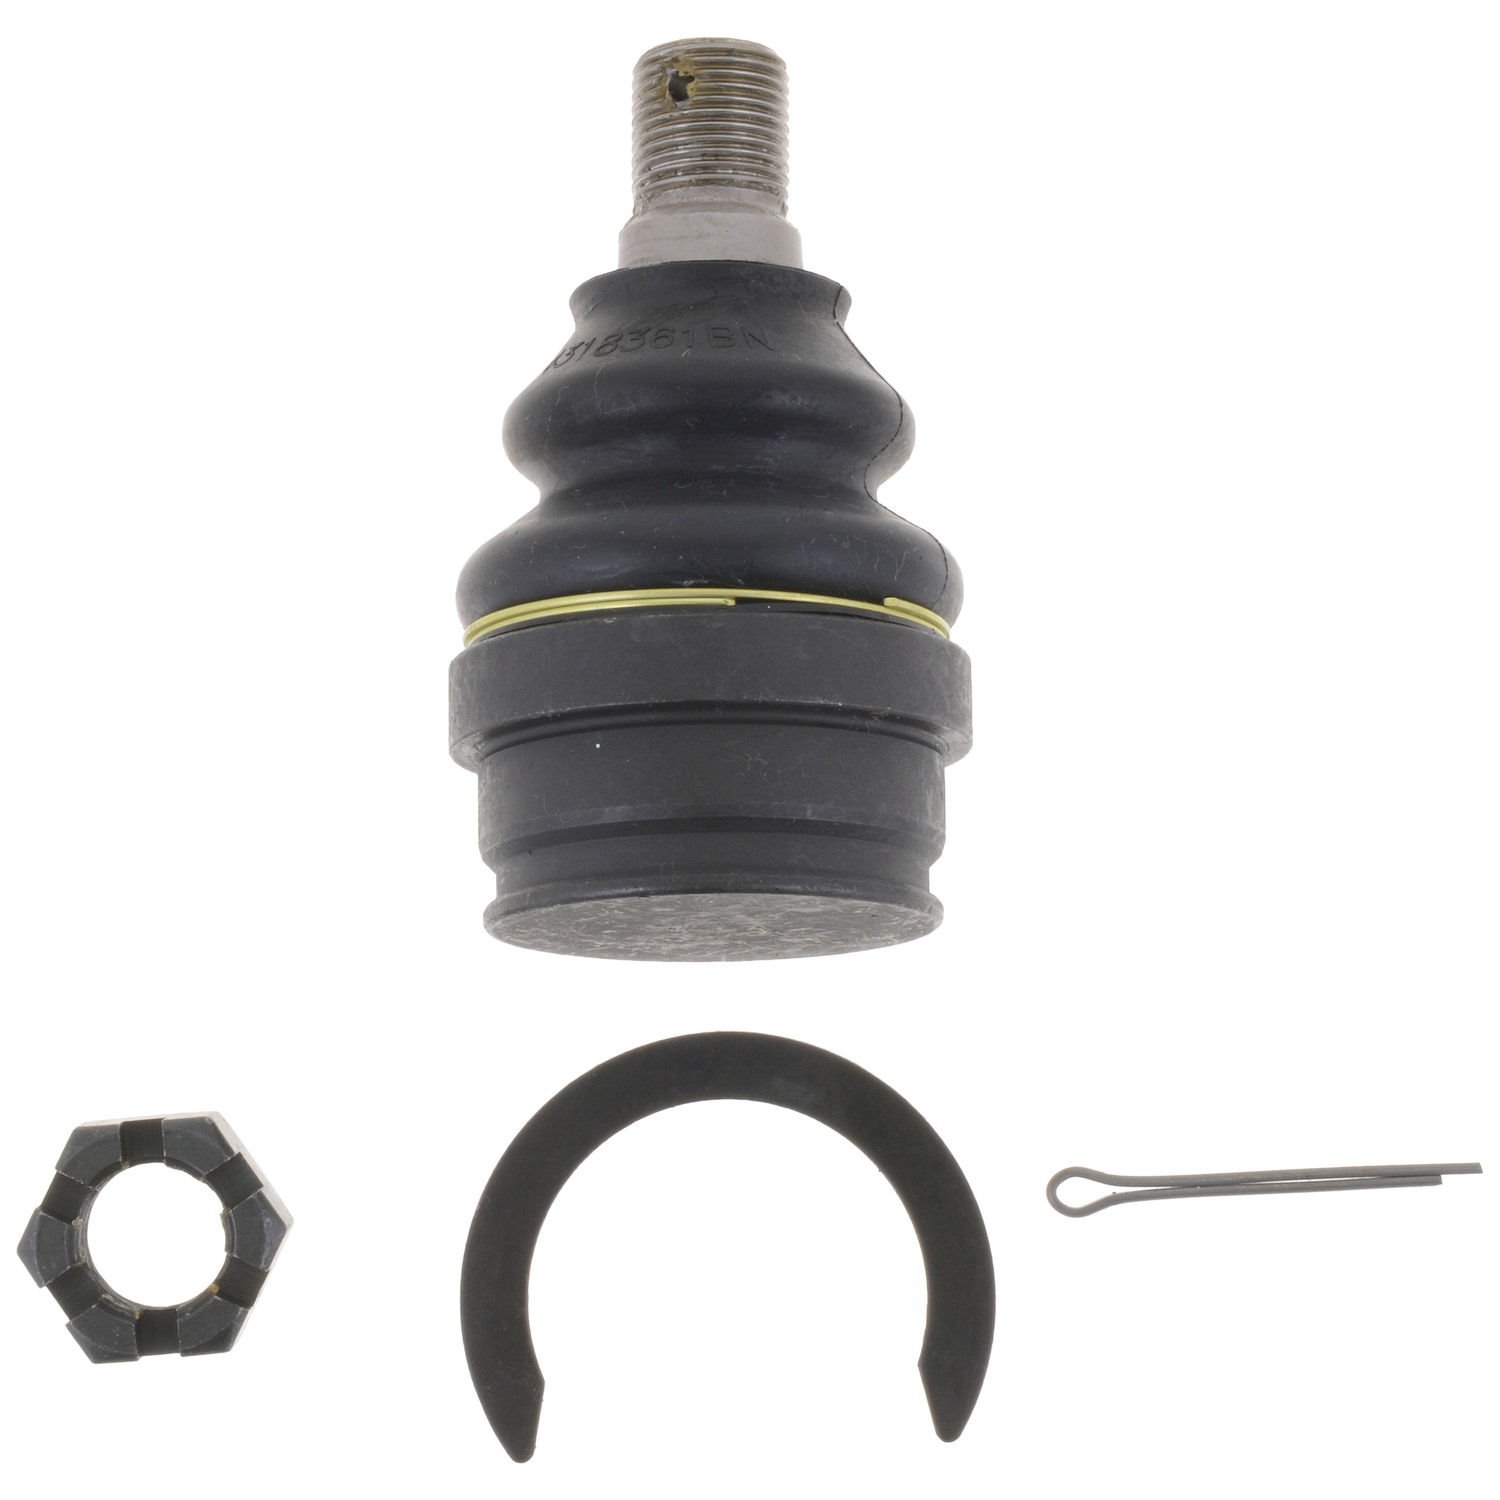 JBJ487 Ball Joint Fits Select Toyota Models, Position: Left/Driver or Right/Passenger, Lower